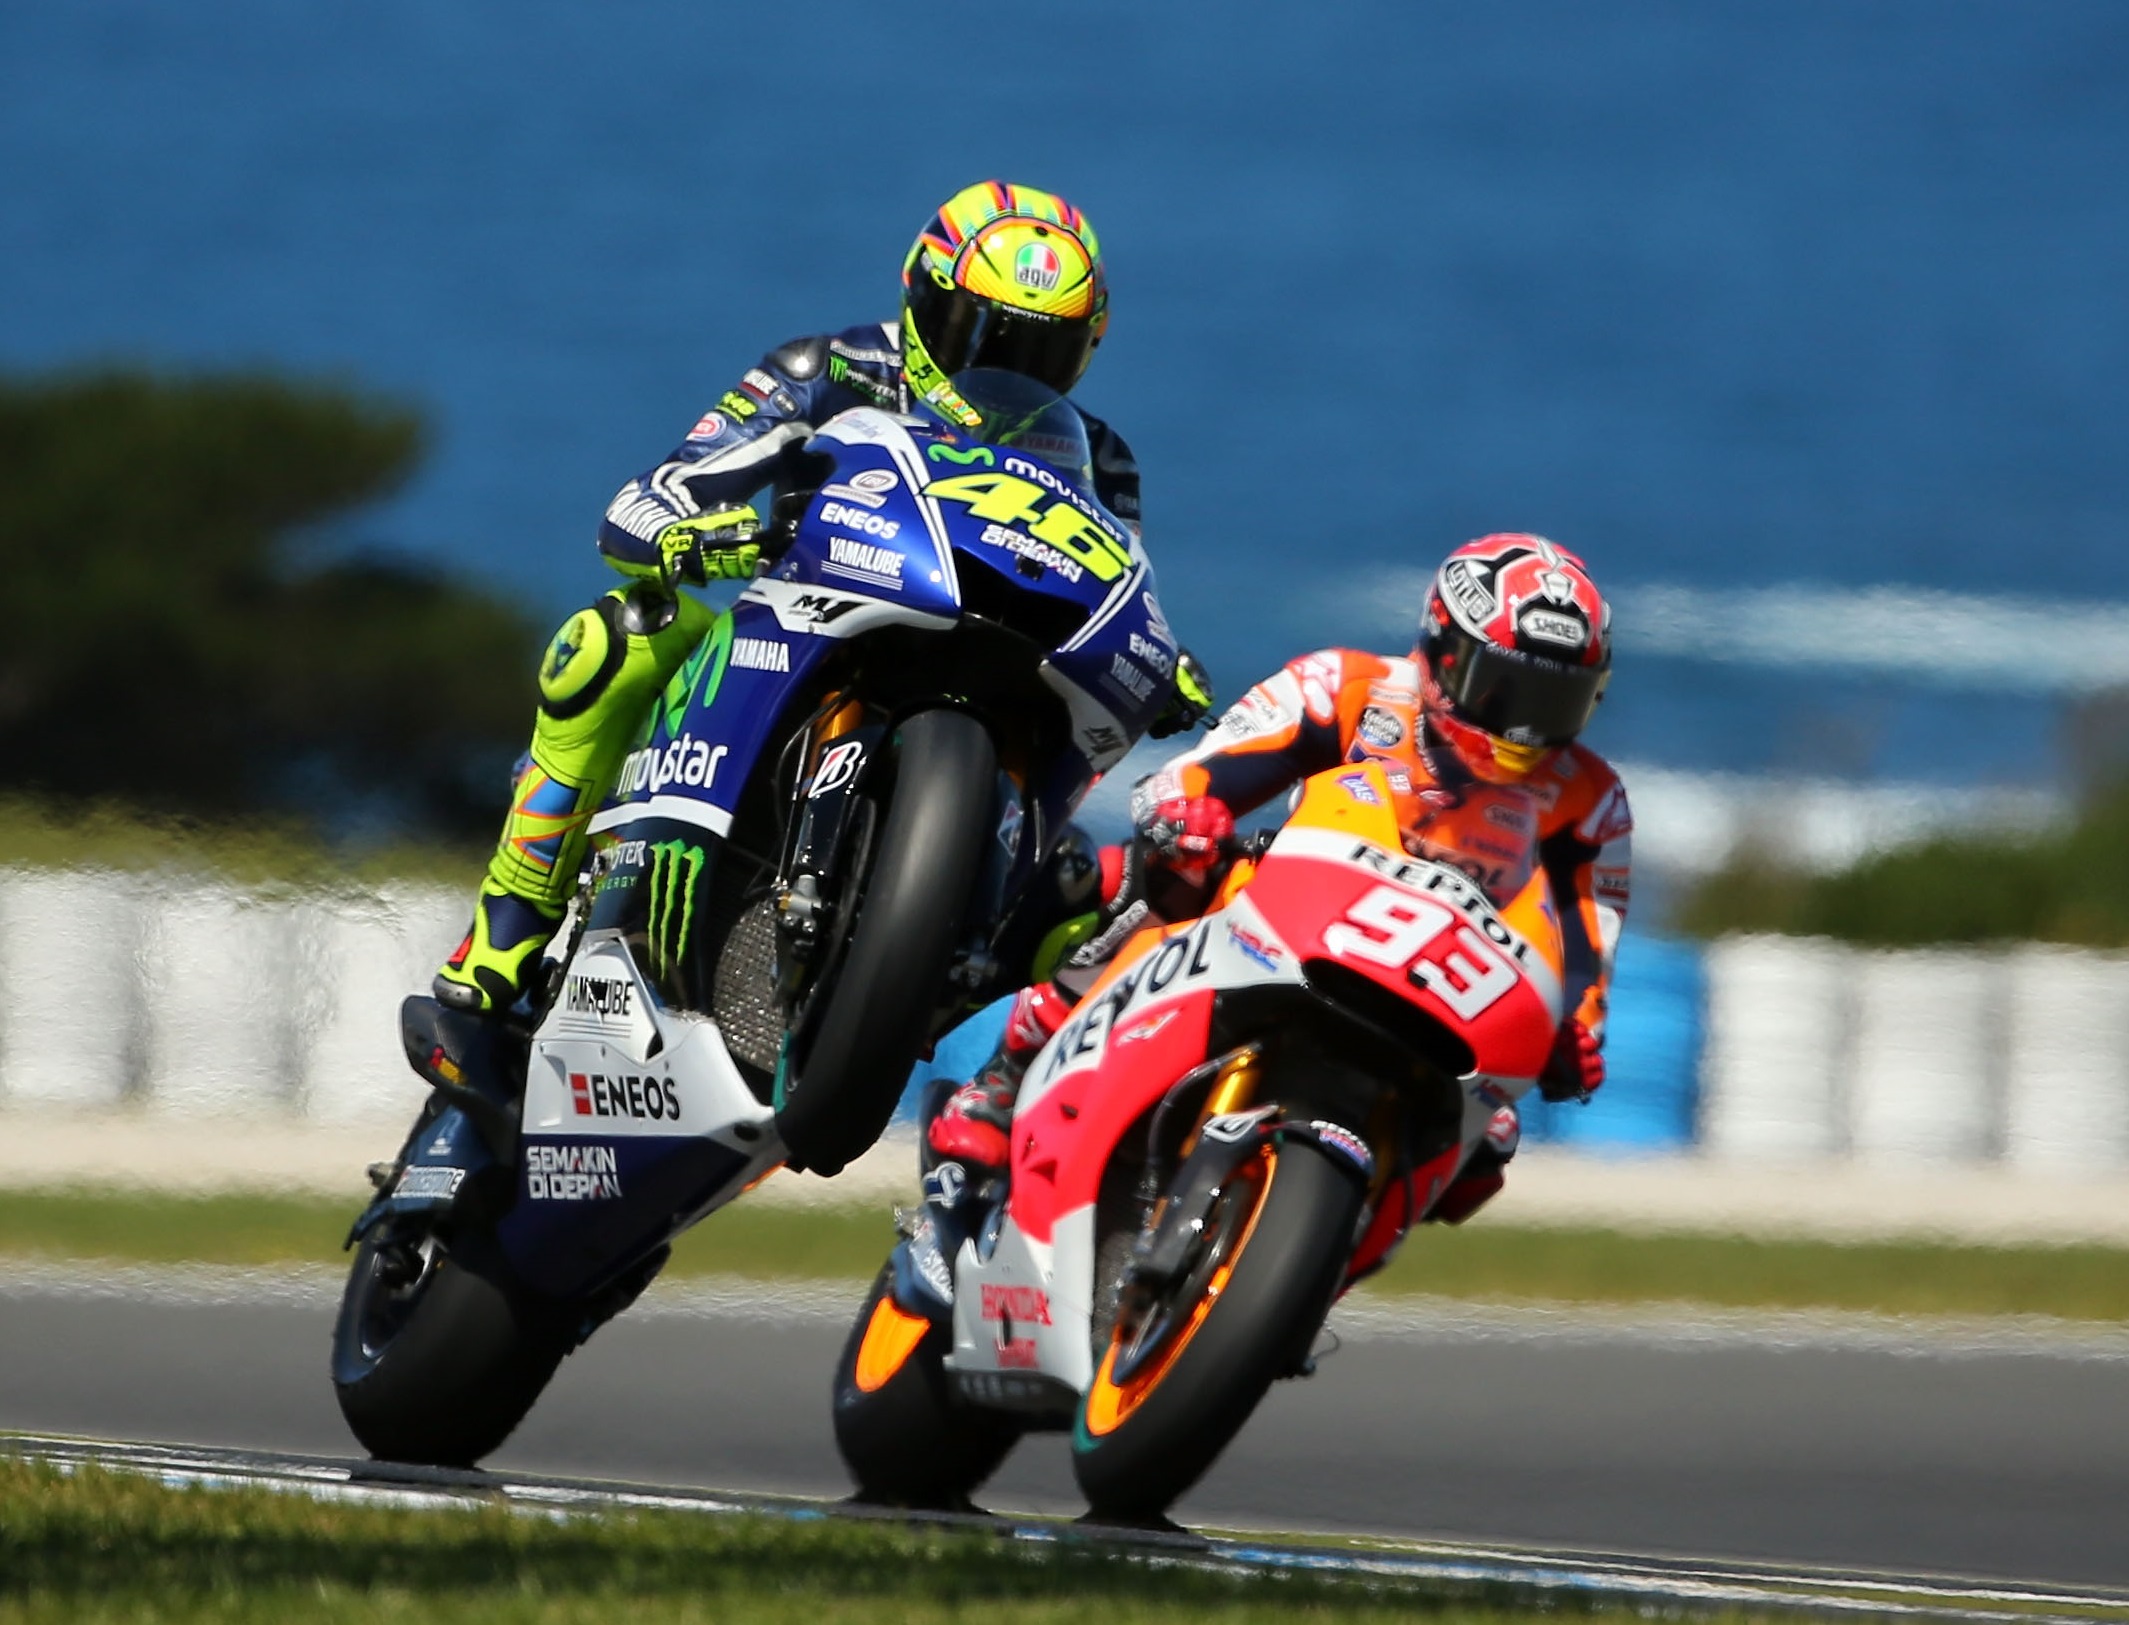   Valentino Rossi leads Marc Marquez at Phillip Island  image - supplied/Ten Network 